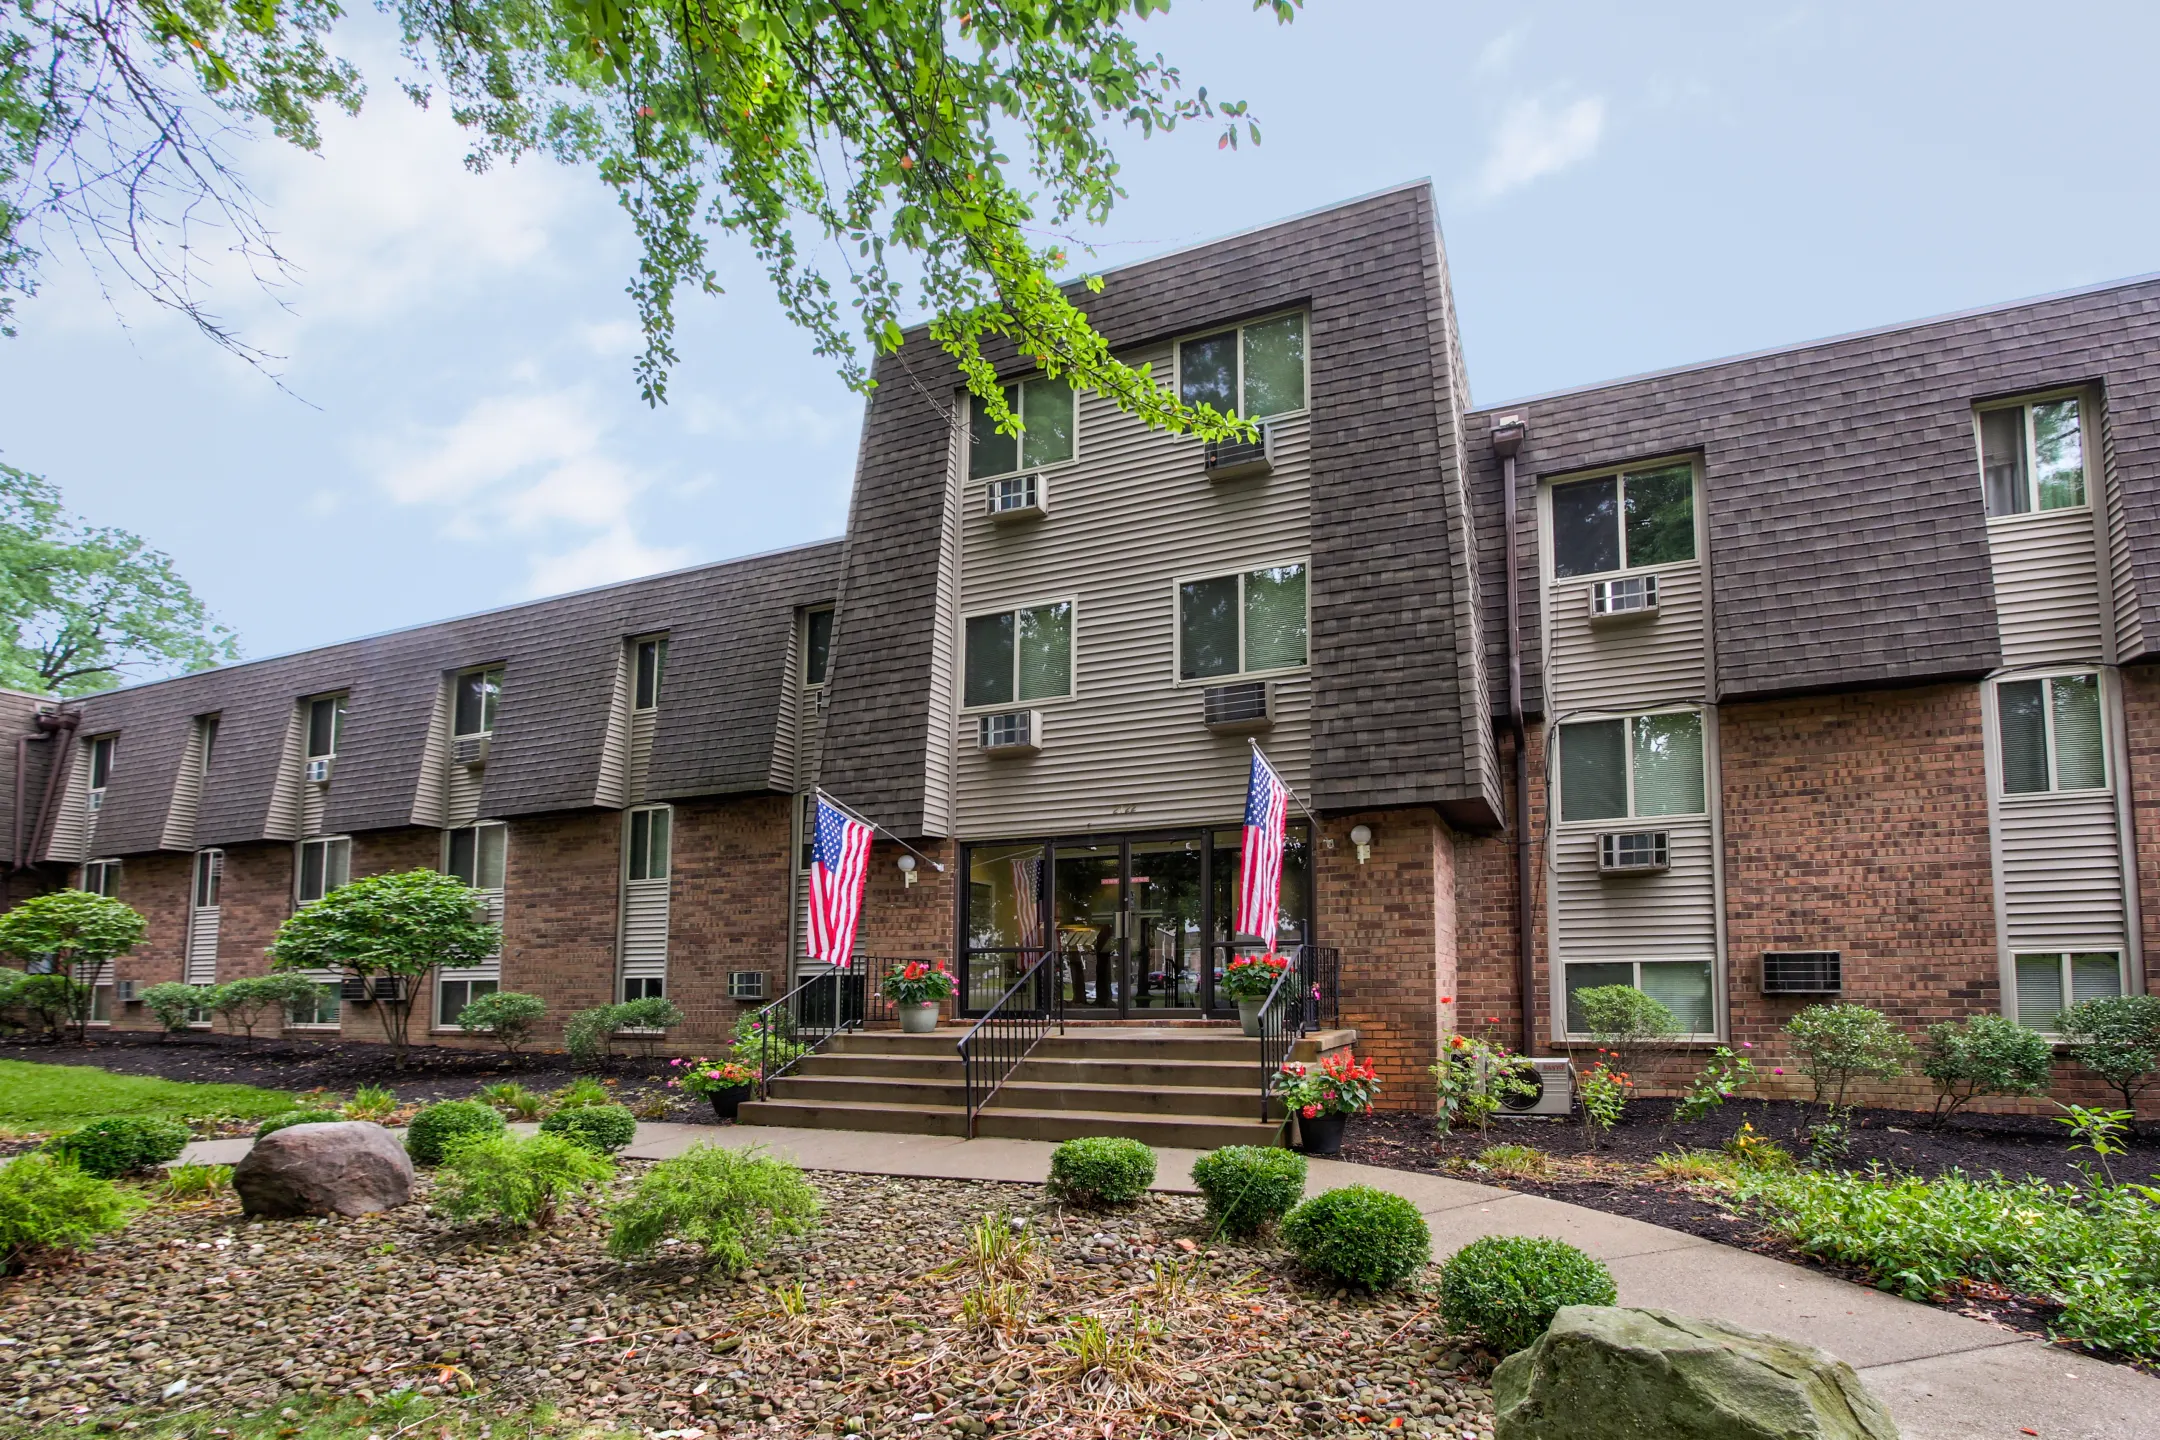 Building - Peppertree Apartments - Niles, OH